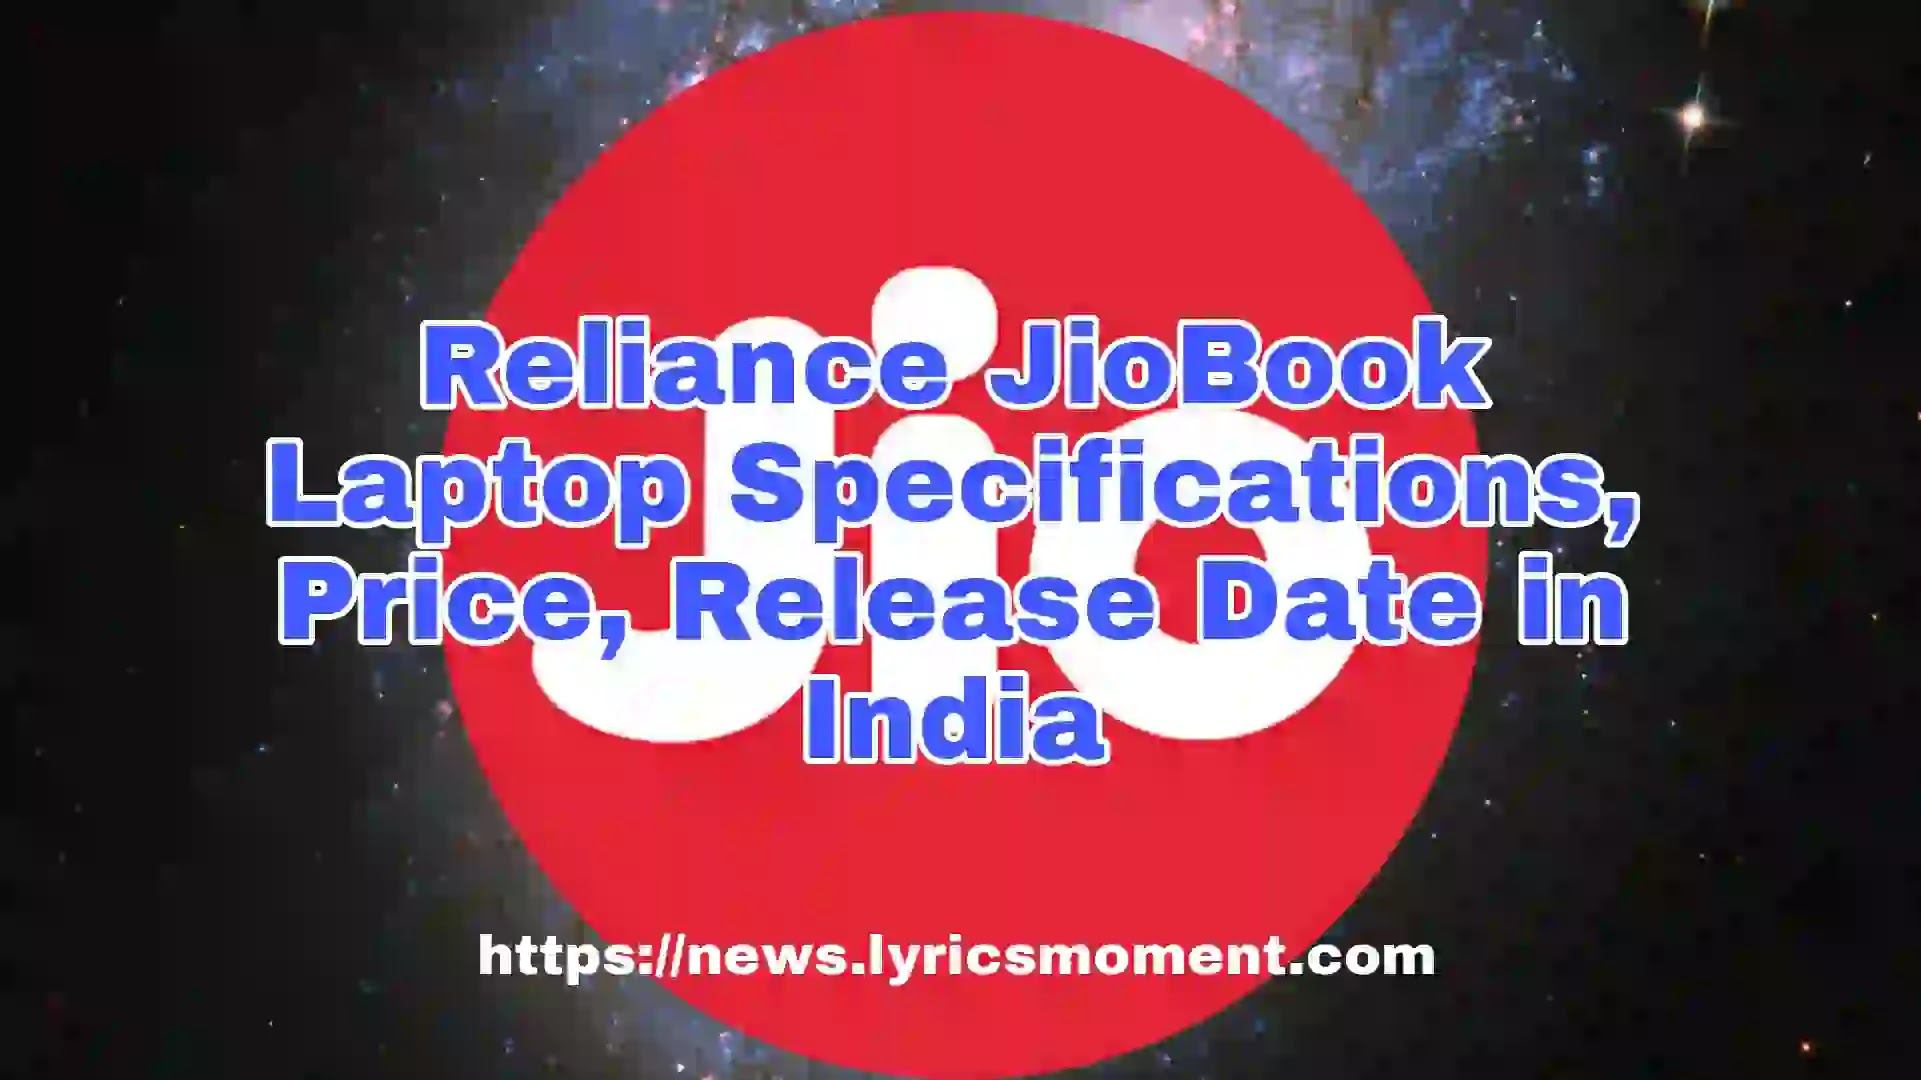 Reliance JioBook Laptop Specifications, Price, Release Date in India